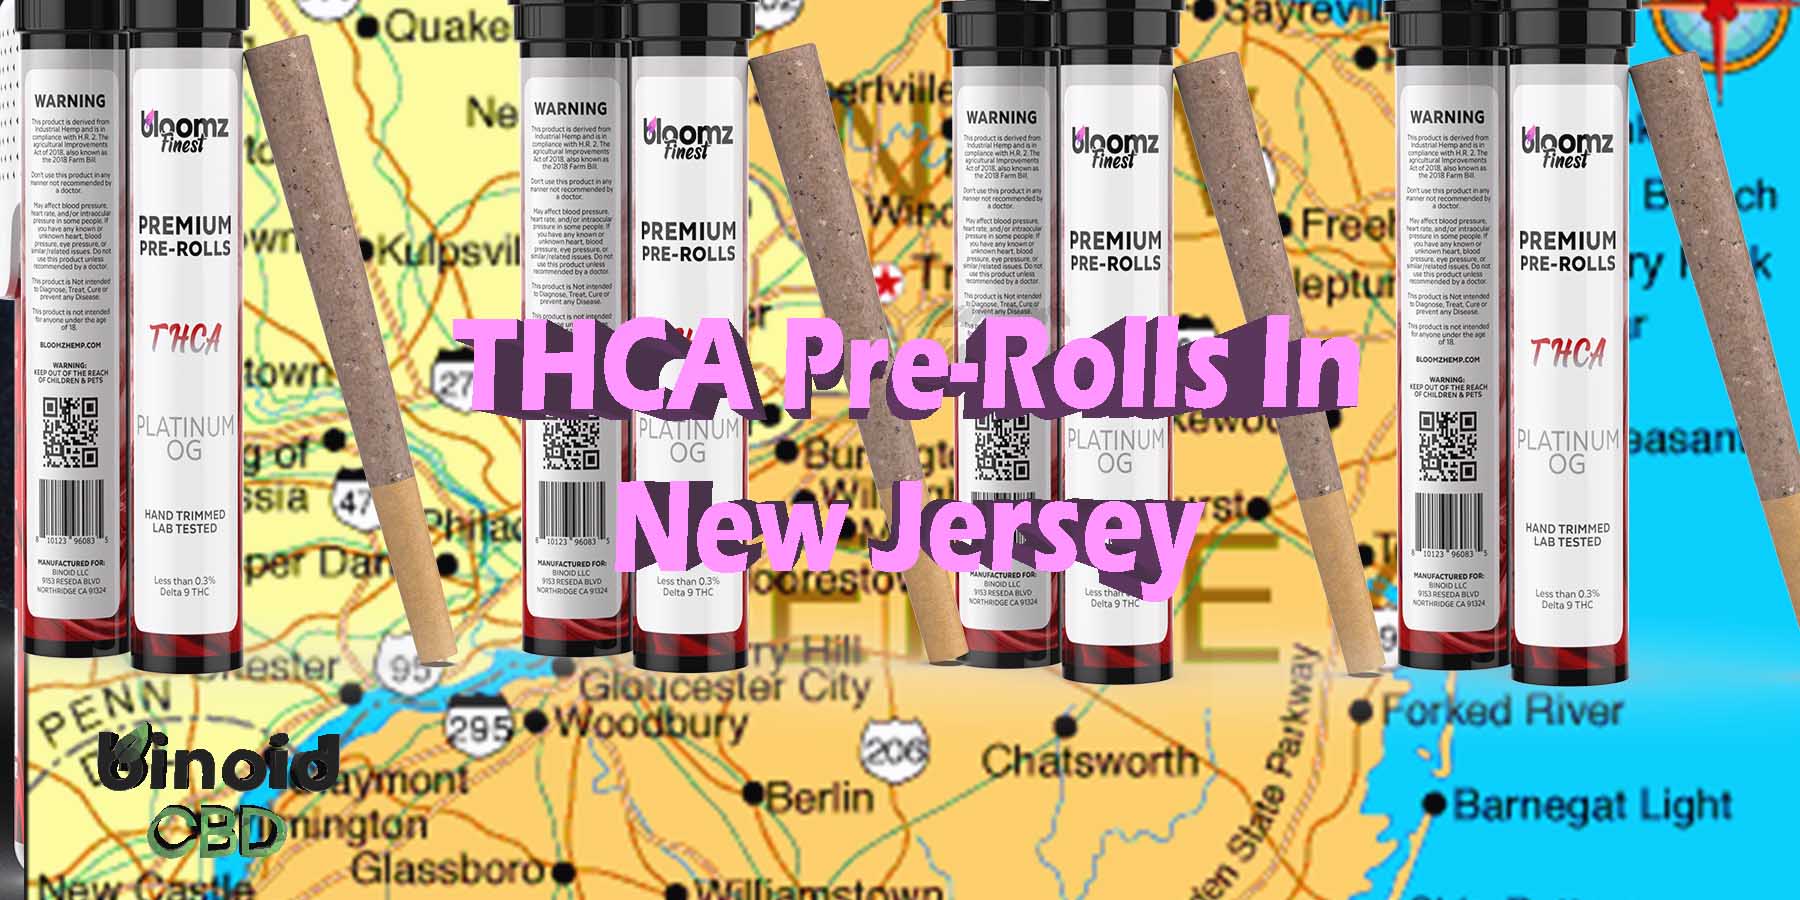 THCA Pre-Rolls In New Jersey THCA Hemp Flower Indica Where To Get Near Me Best Place Lowest Price Coupon Discount Strongest Brand Bloomz